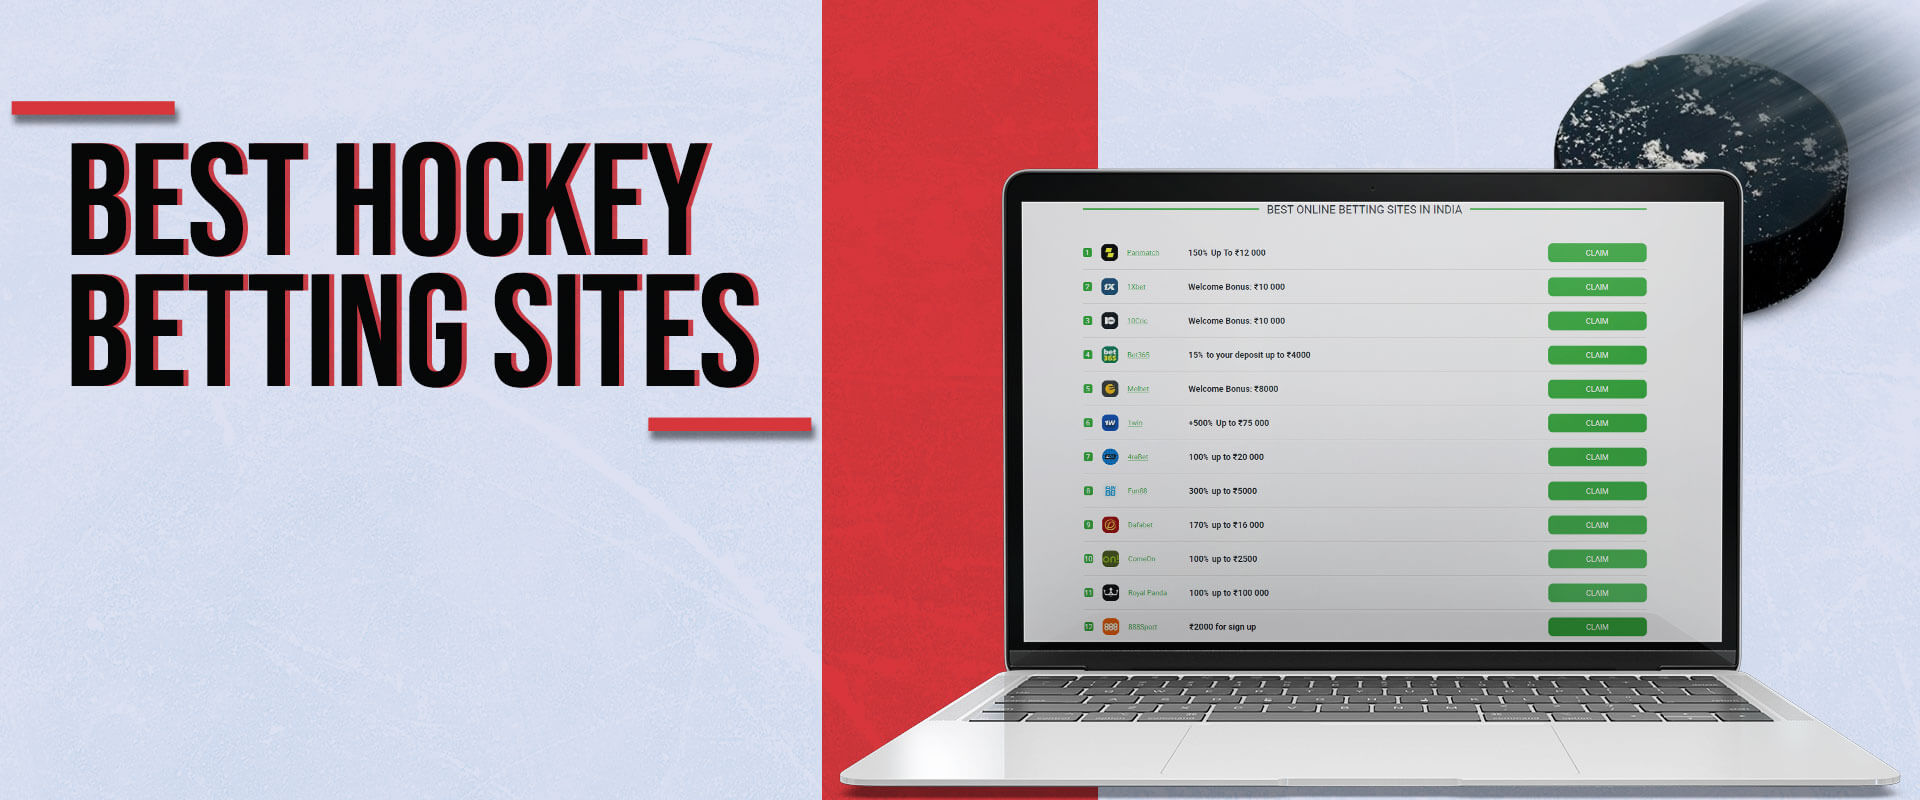 The best hockey betting sites.